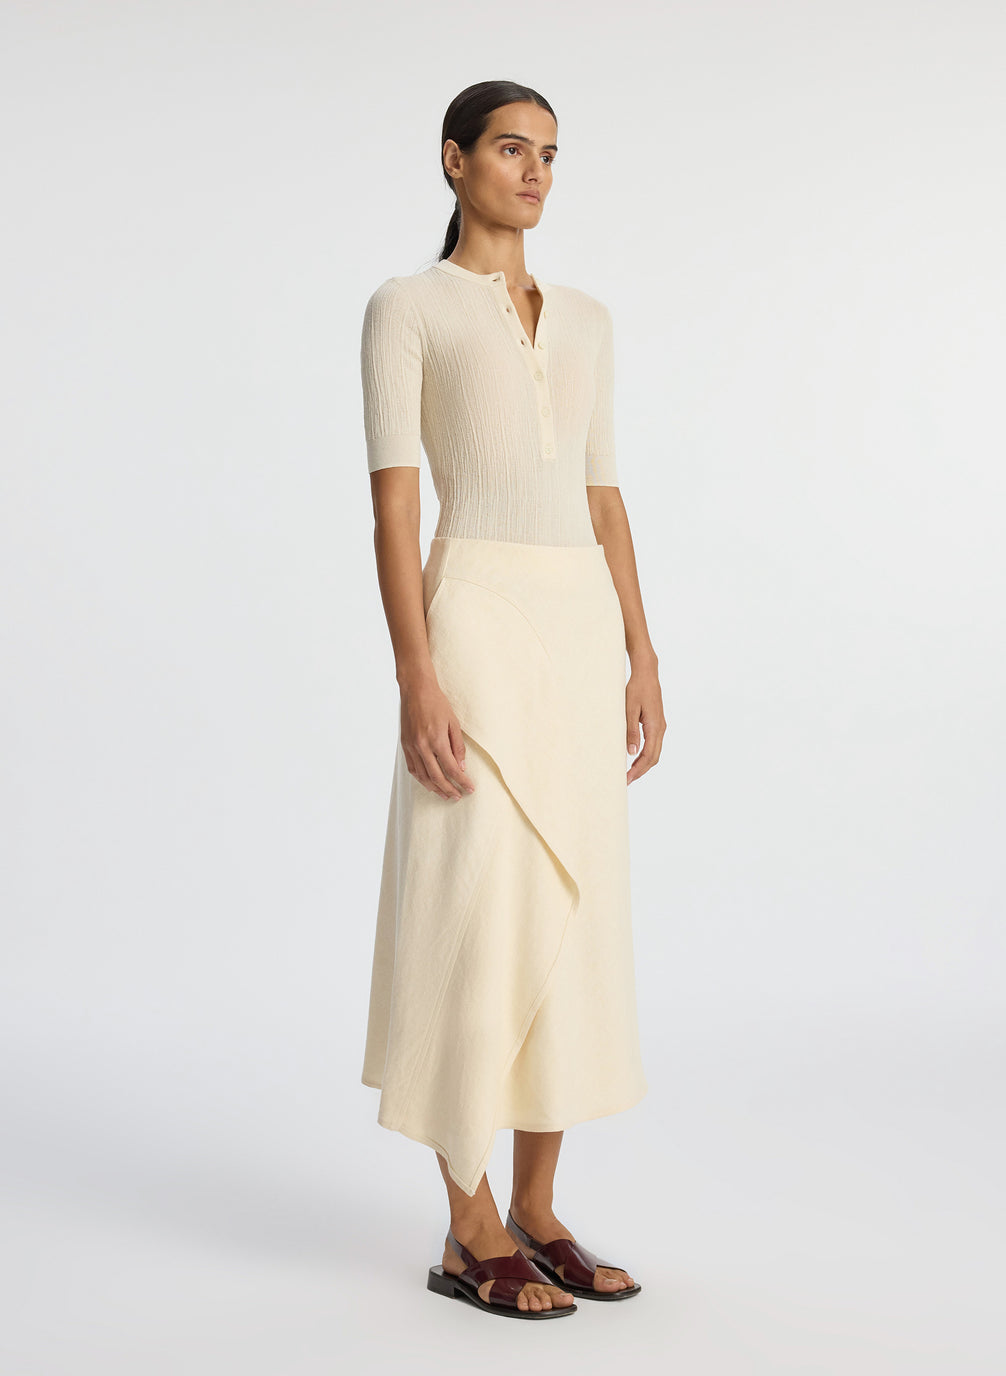 side view of woman wearing beige short sleeve shirt and cream midi skirt